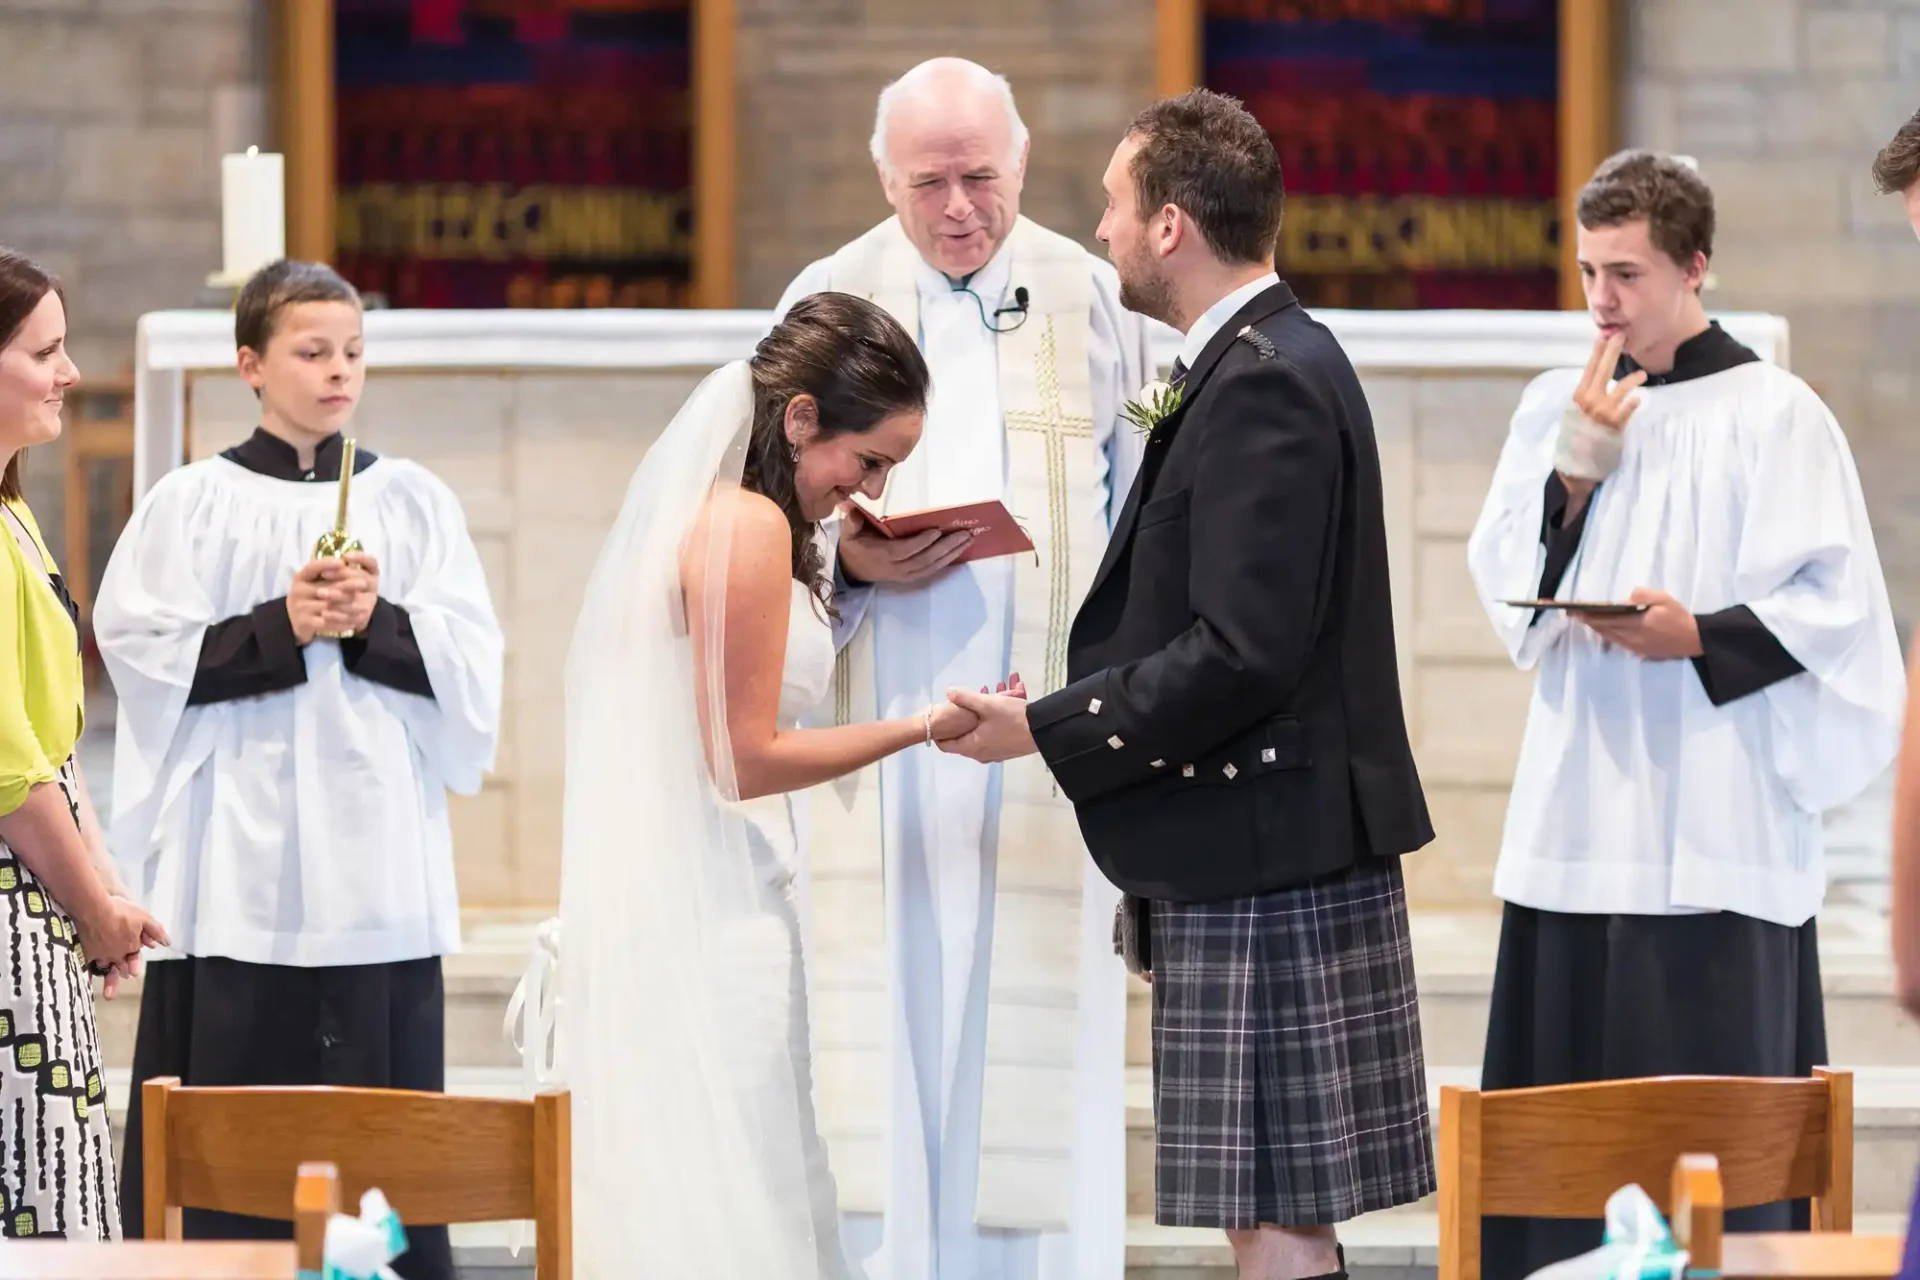 Bride and groom exchanging rings at a church wedding ceremony, officiated by a priest, with attendants watching in the background.